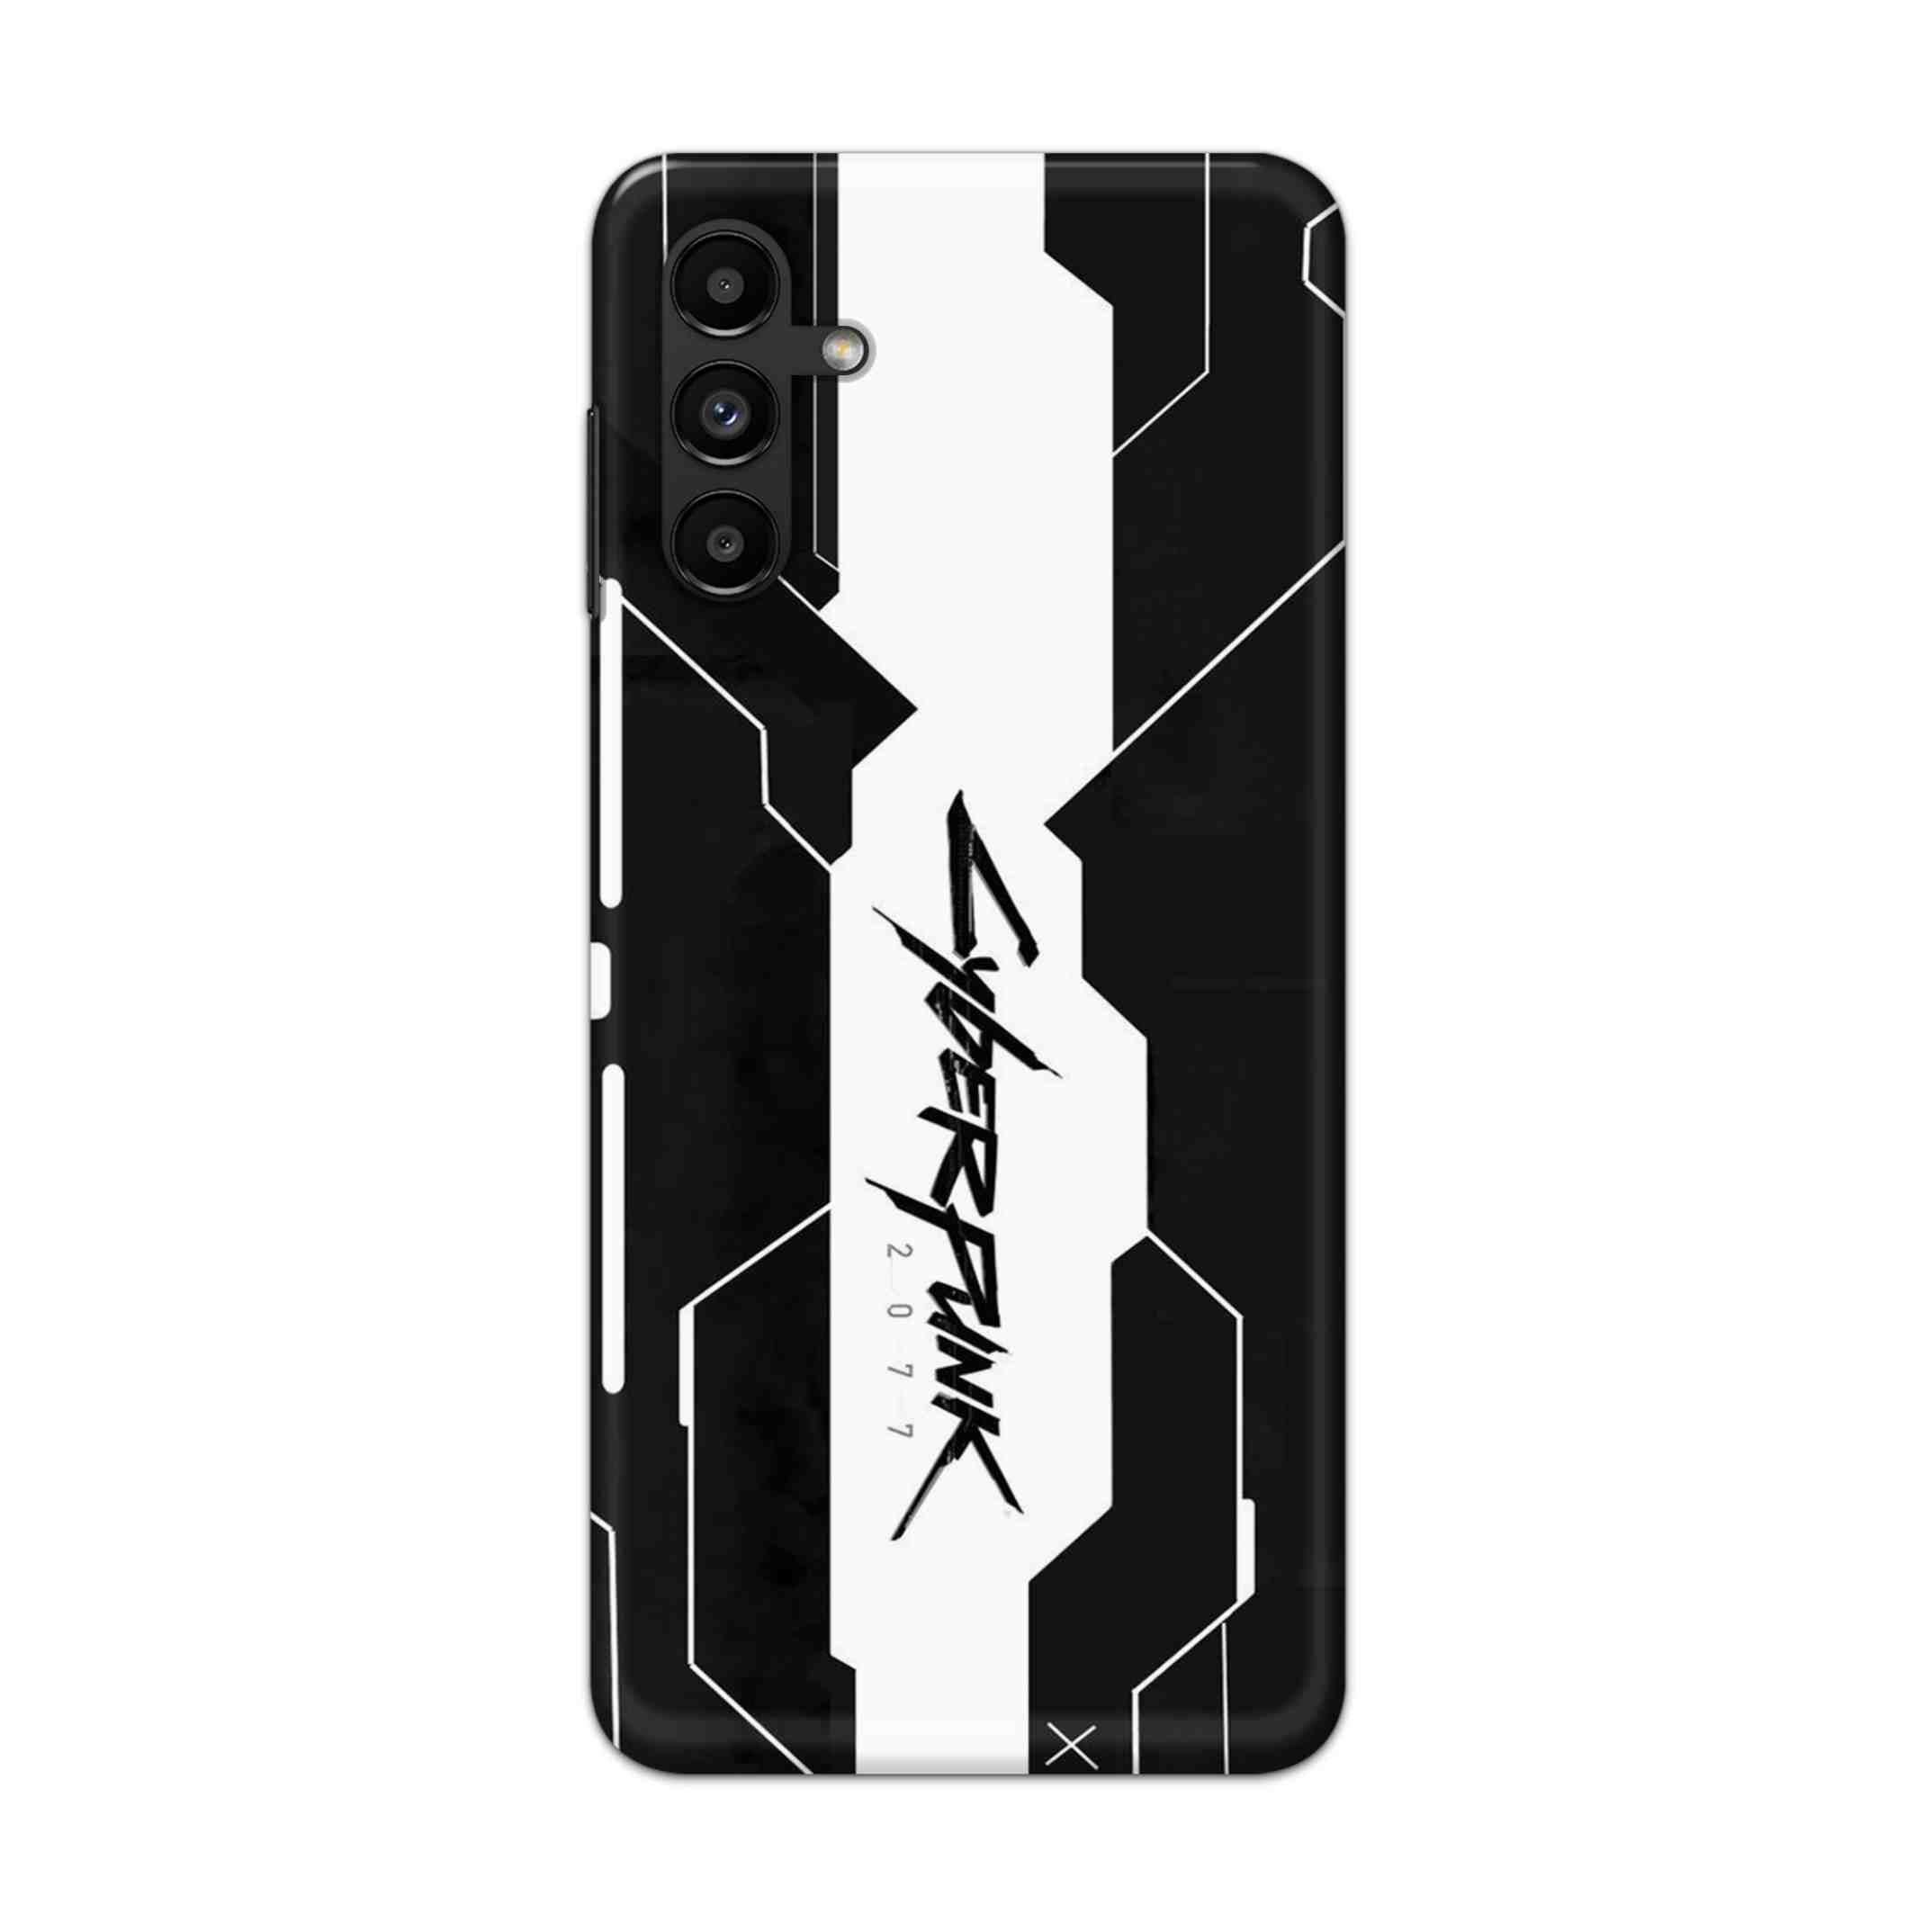 Buy Cyberpunk 2077 Art Hard Back Mobile Phone Case/Cover For Galaxy A13 (5G) Online